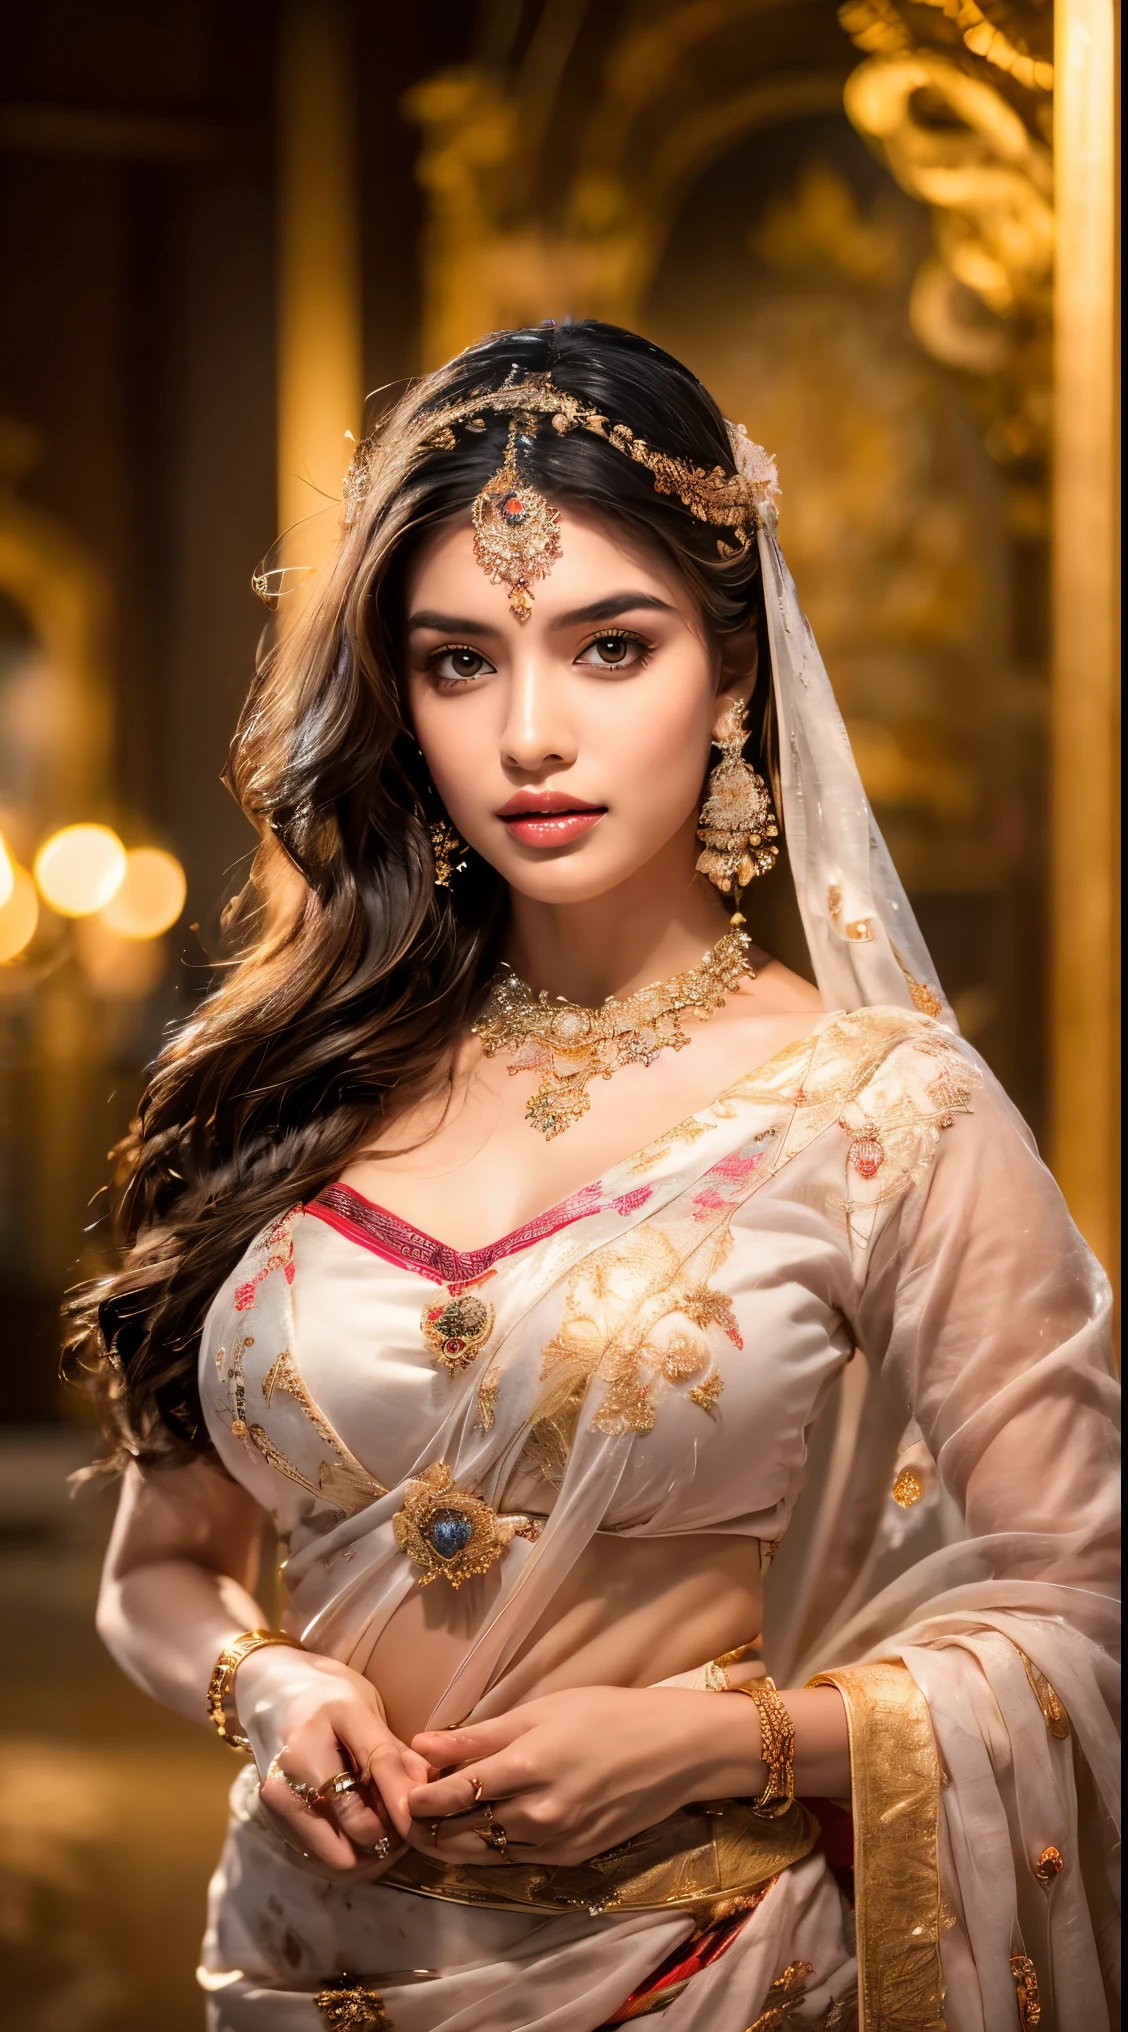 ((Best quality, 8k, Masterpiece :1.3)), Sharp focus :1.2, Generate a realistic image of a beautiful sexy Indian woman dressed in a white Kasava saree, adorned with traditional ornaments, standing in a well-lit room with cinematic lighting. ((Front view, random elegant pose)), and there is a sense of grace and elegance in her posture. The background should complement the scene, enhancing the overall aesthetic appeal of the image. Photography by Brandon Woelfel, Full shot: Canon EF 16-35mm f/2.8L III USM lens on a Canon EOS 5D Mark IV camera, ultra realistic, 32k, HD